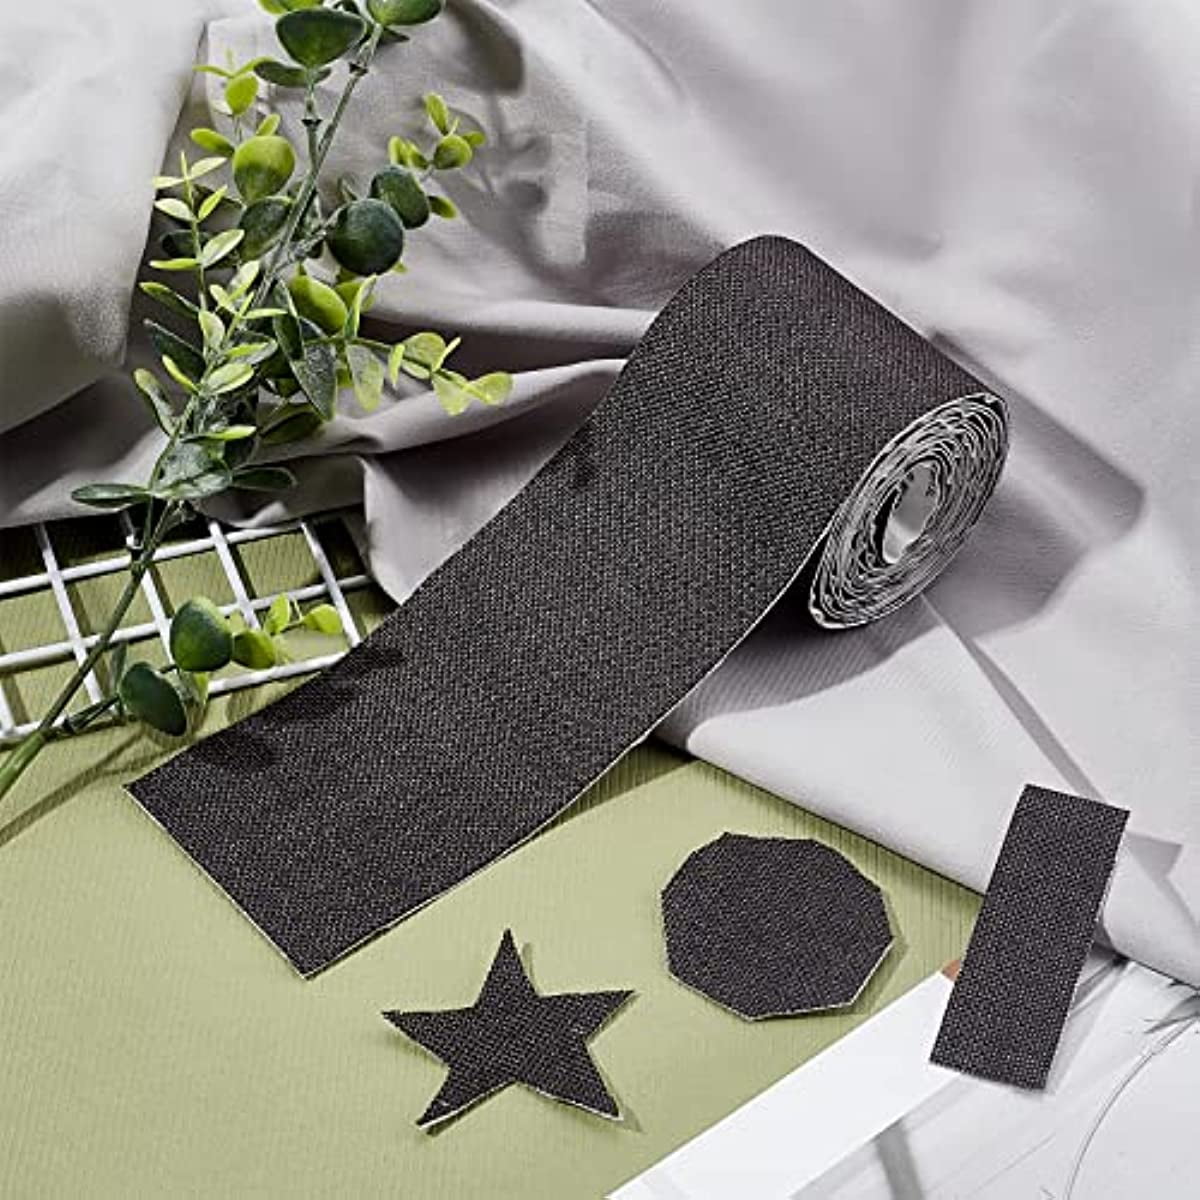 Self-Adhesive Linen Fabric Patch Black Fabric Repair Patch Decorative Patch  Clothes Patches for Mending Pockets Knees Elbow Sofa Pants Jeans Couch DIY  Crafts Making 